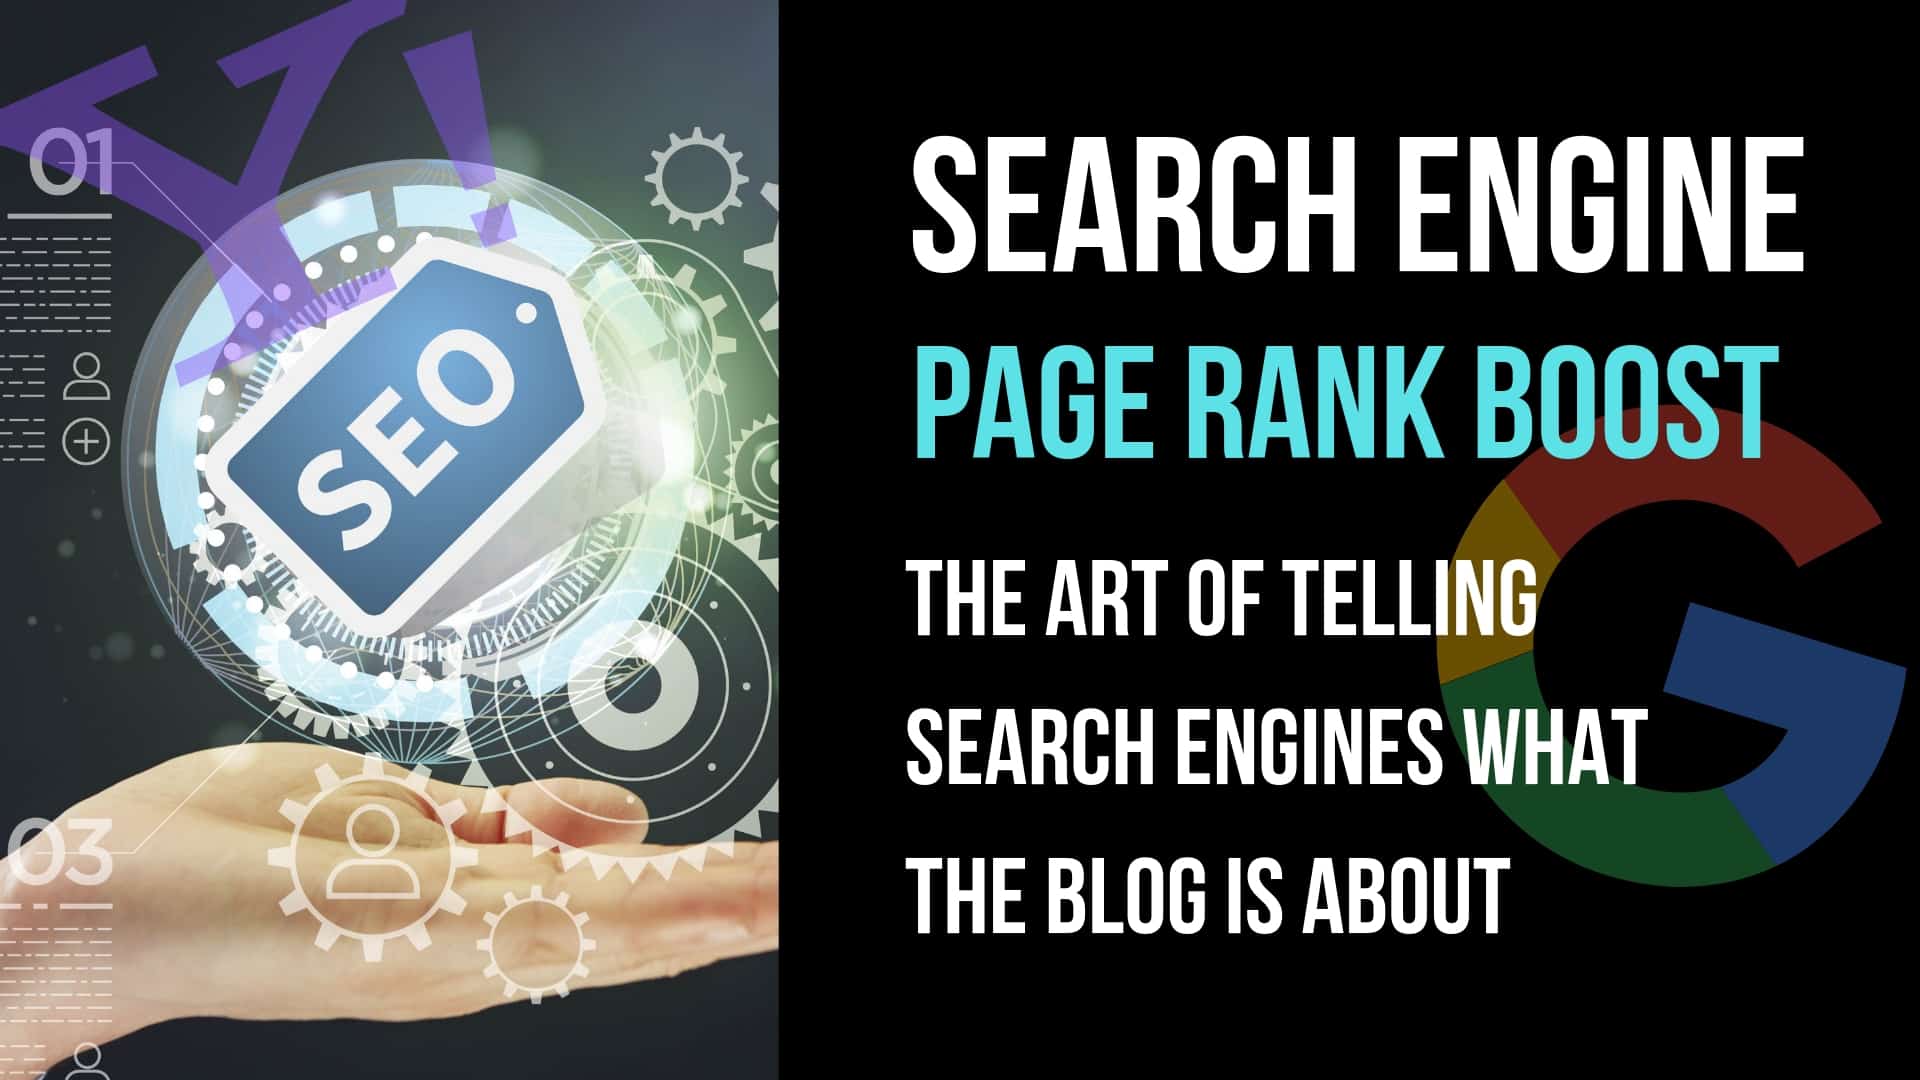 Search engine page rank boost secrets